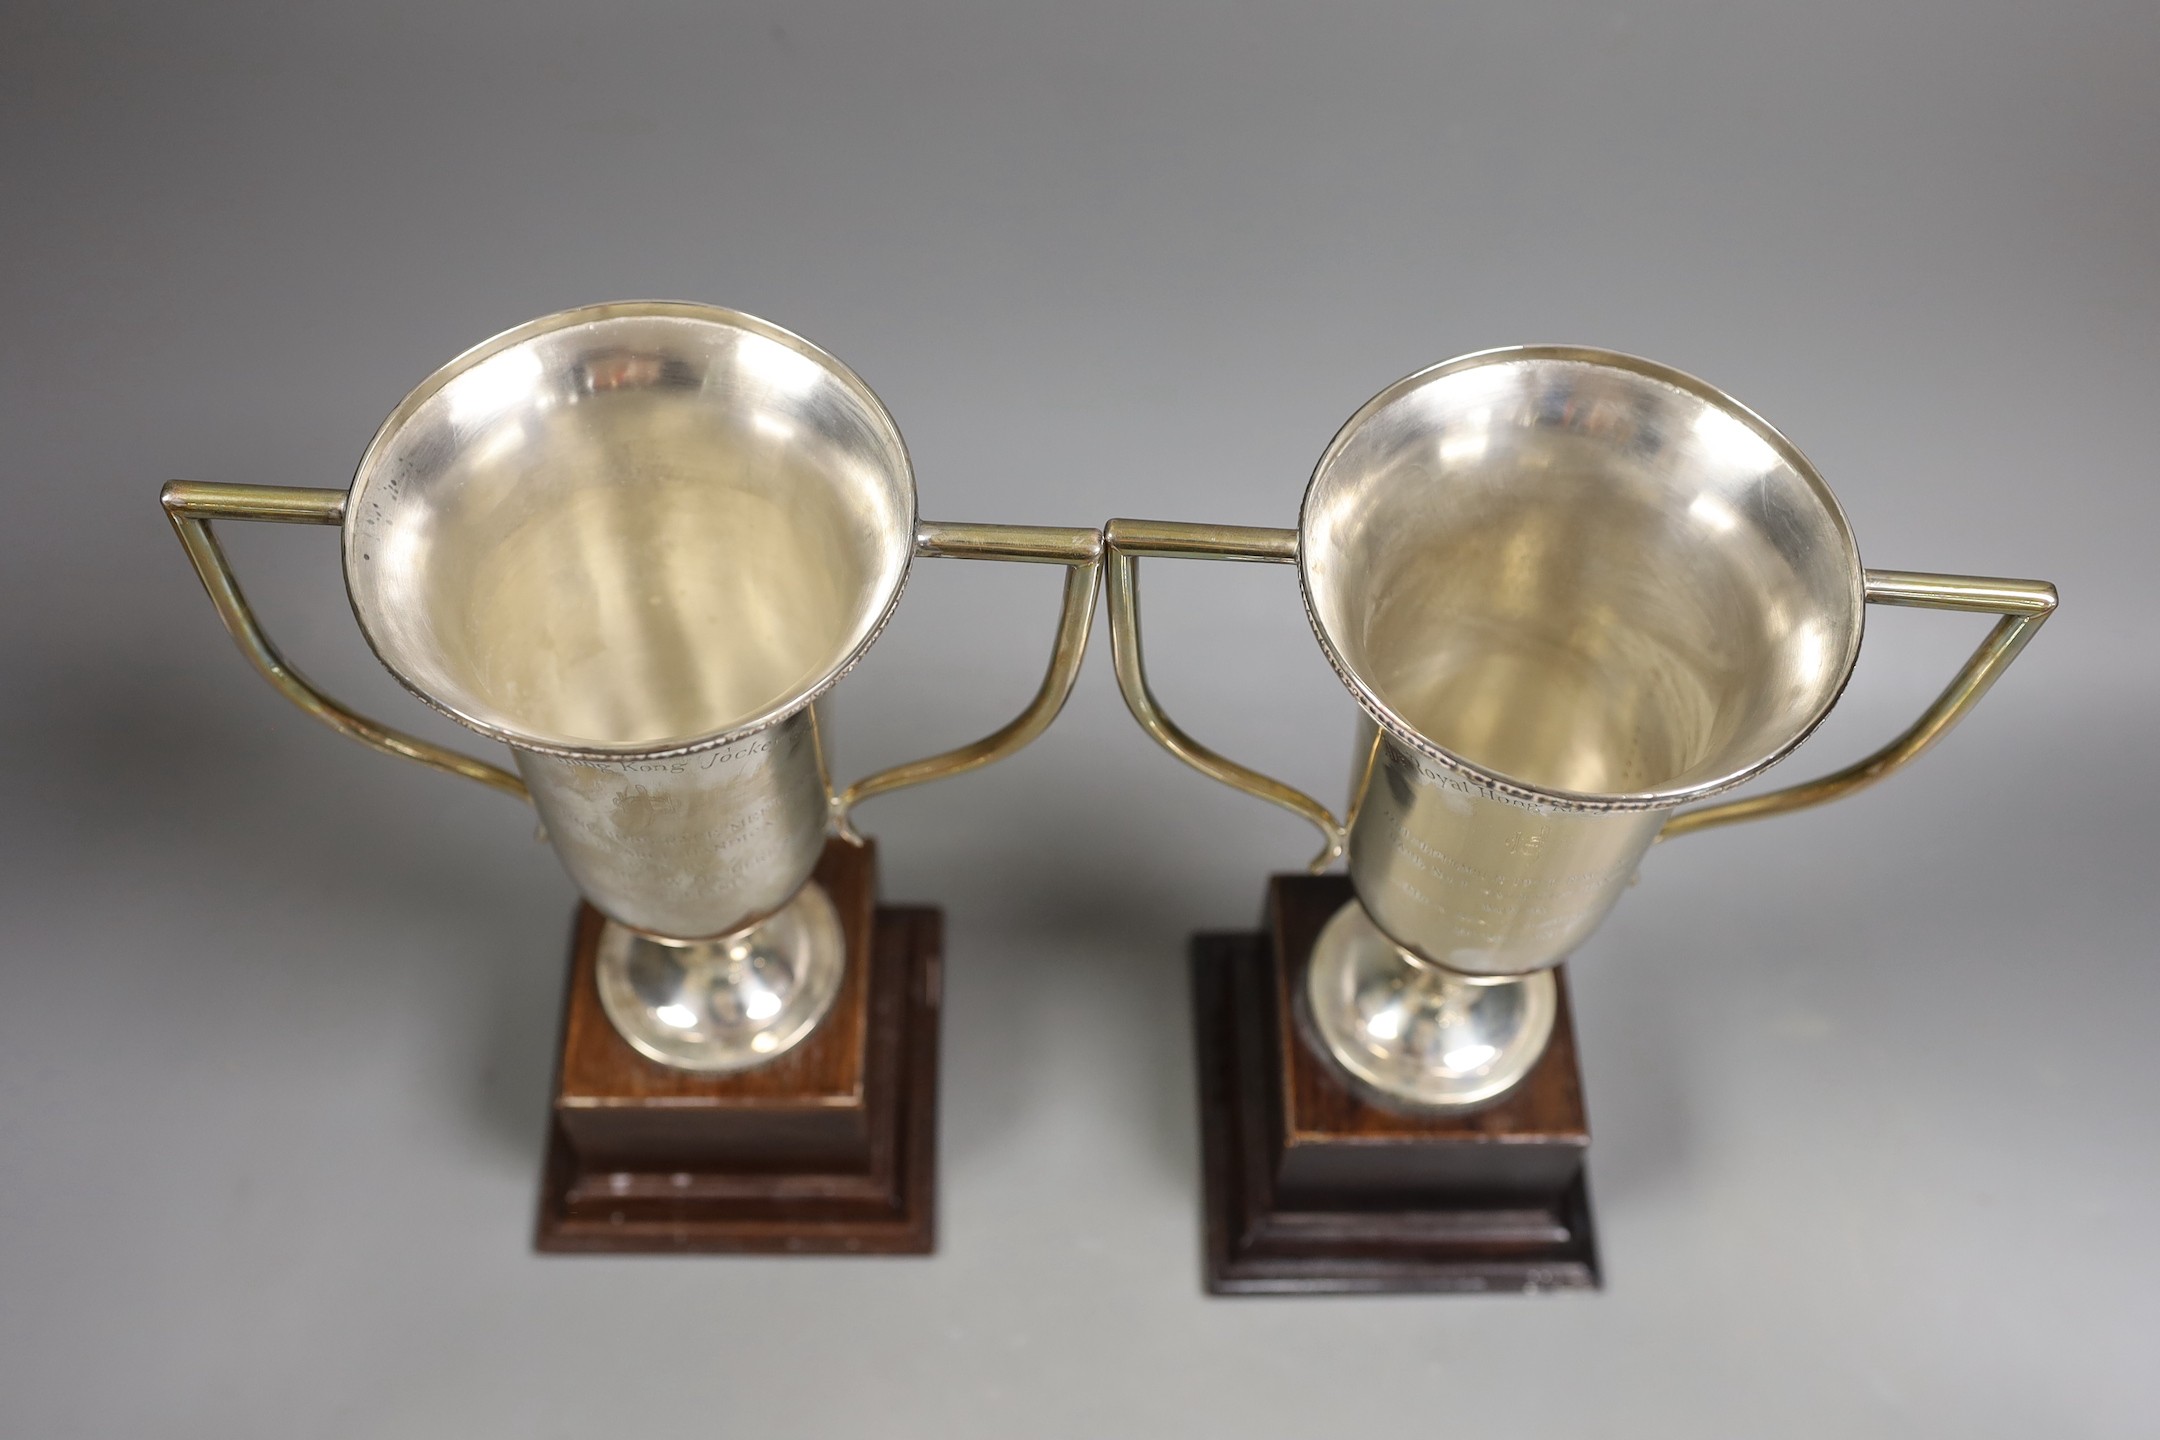 A pair of Royal Hong Kong Jockey Club sterling presentation two handled trophy cups and covers, fixed to wooden plinth bases, height of cups 26cm.